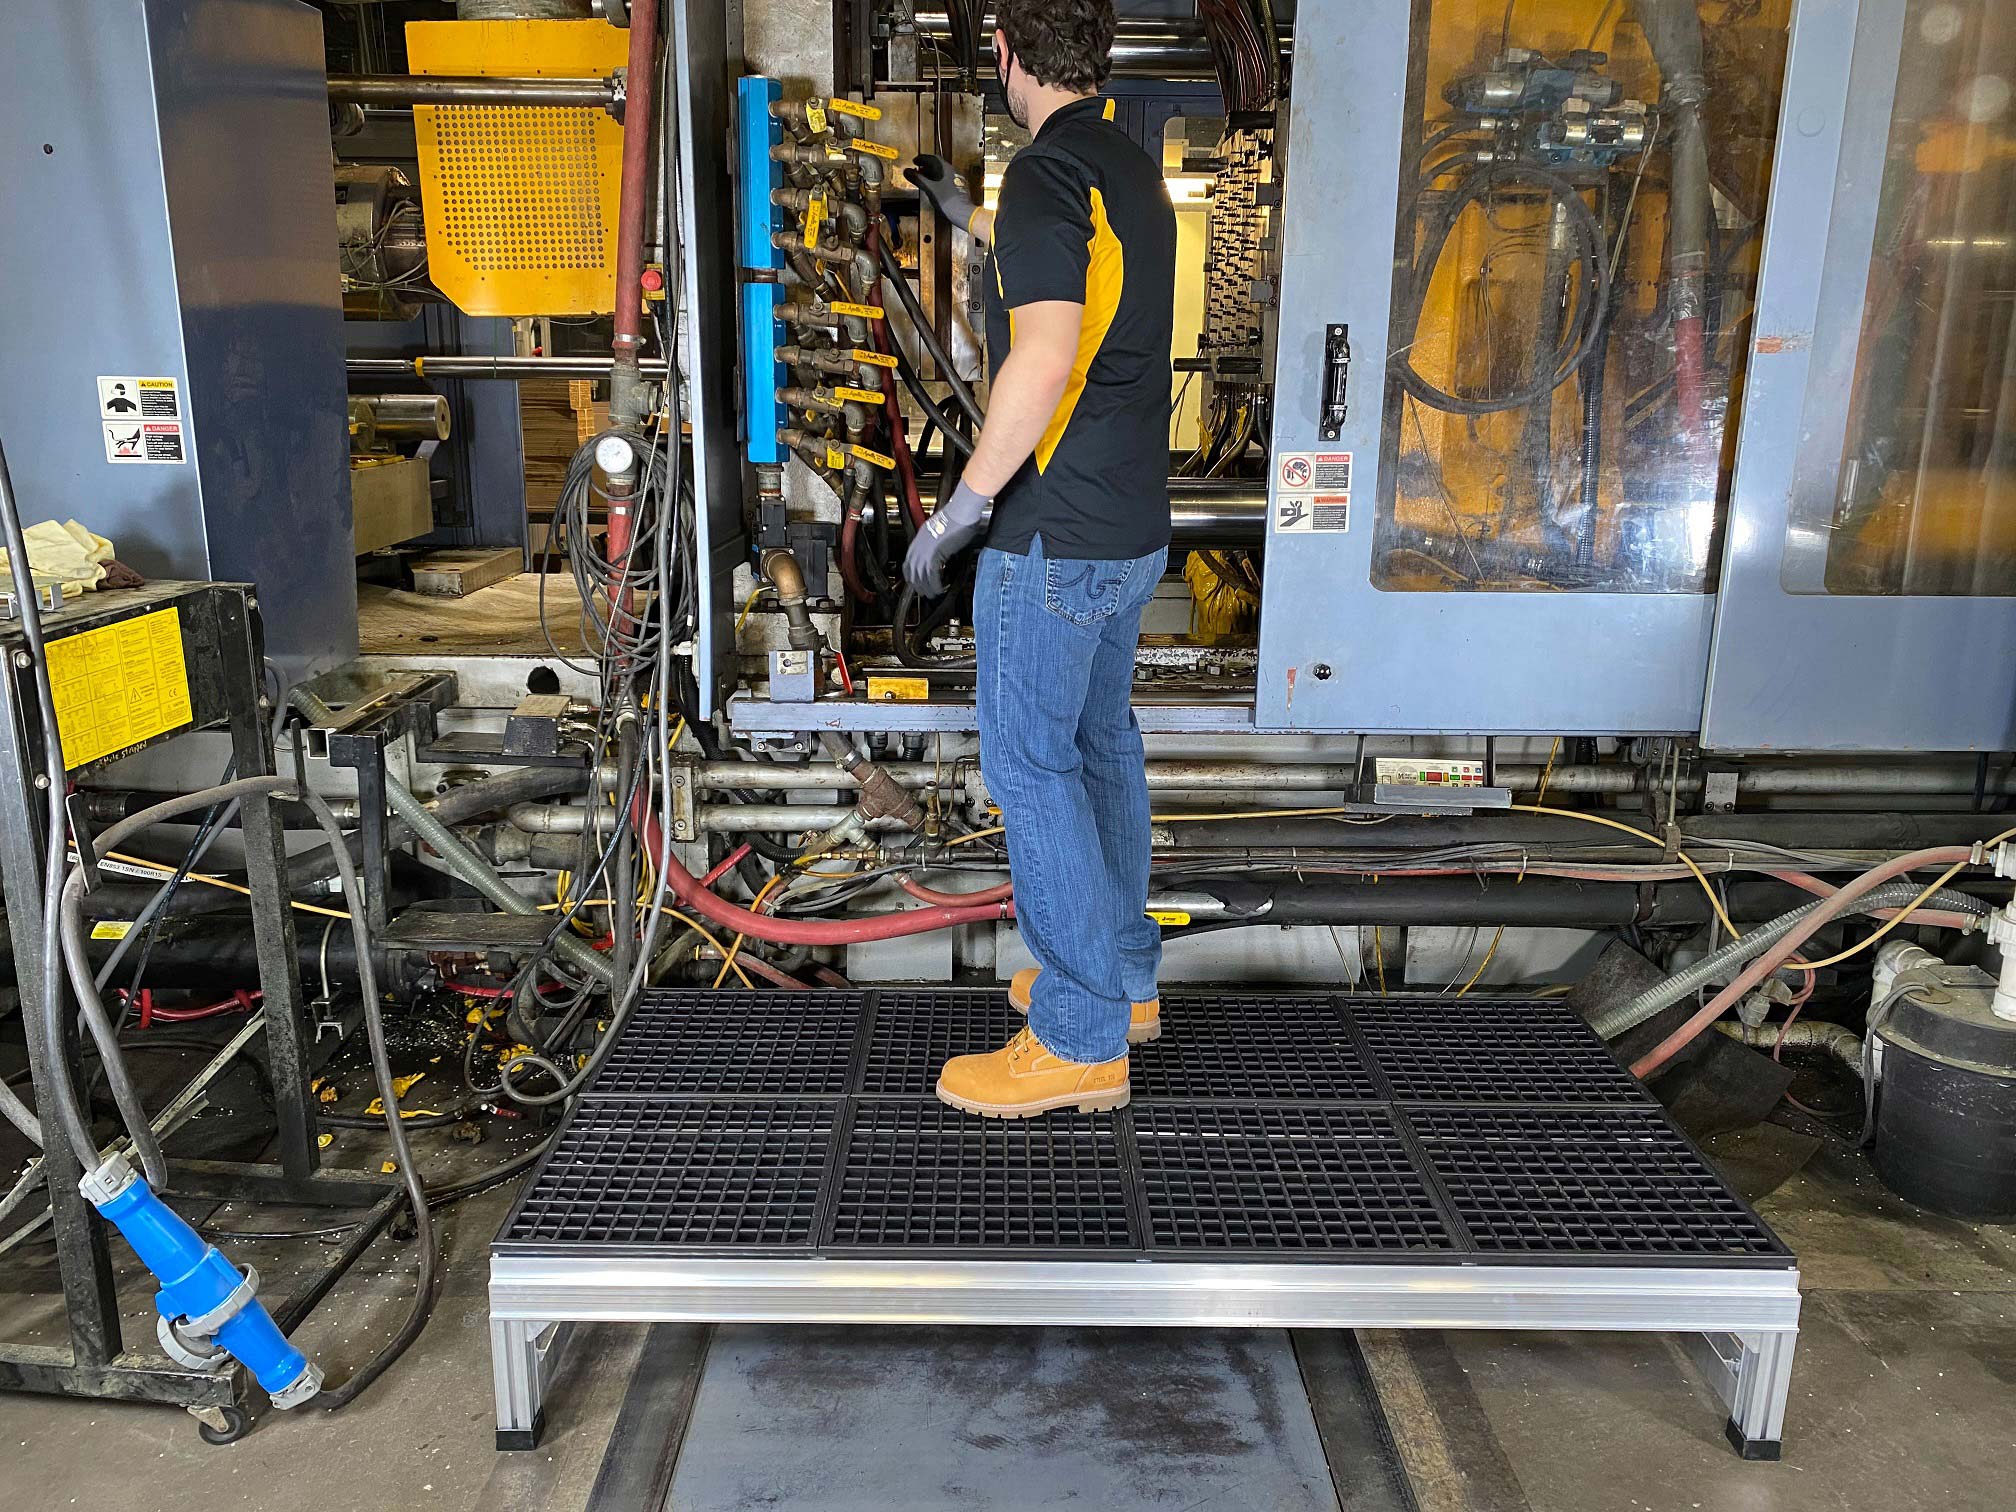 Foundation platform elevating a worker to better reach into a machine